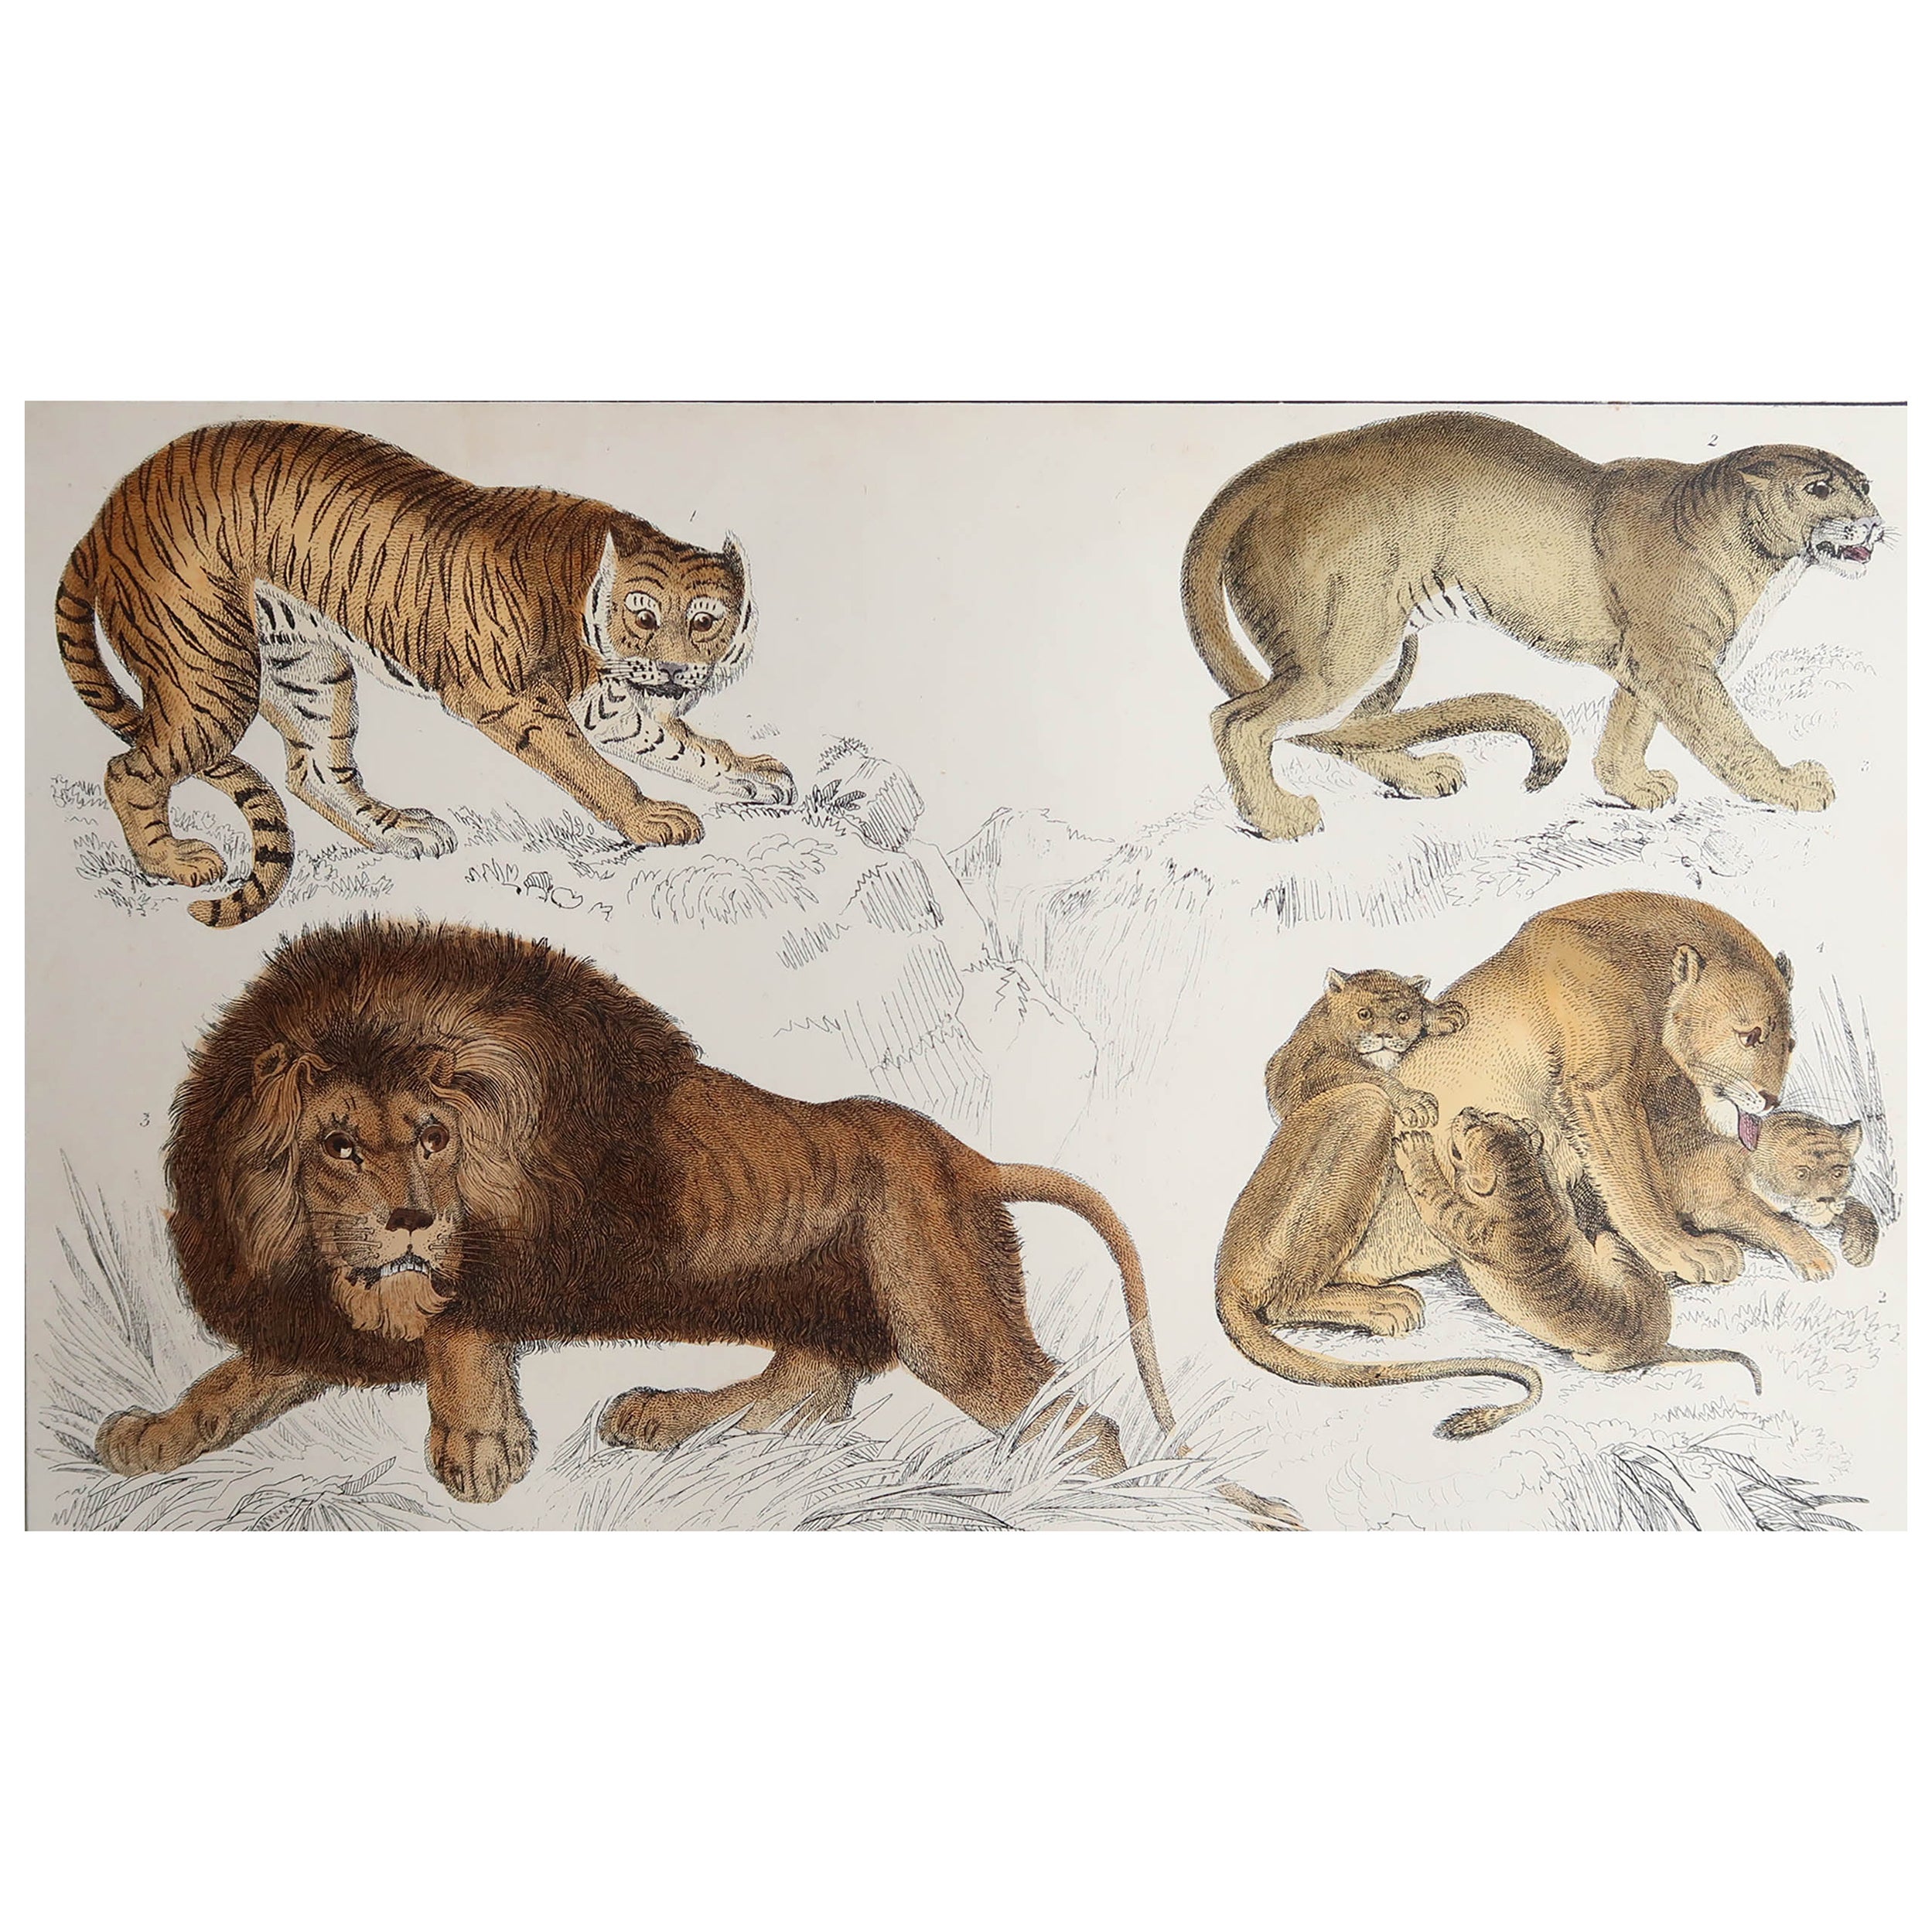 Original Antique Print of Lions and Tigers, 1847 'Unframed'